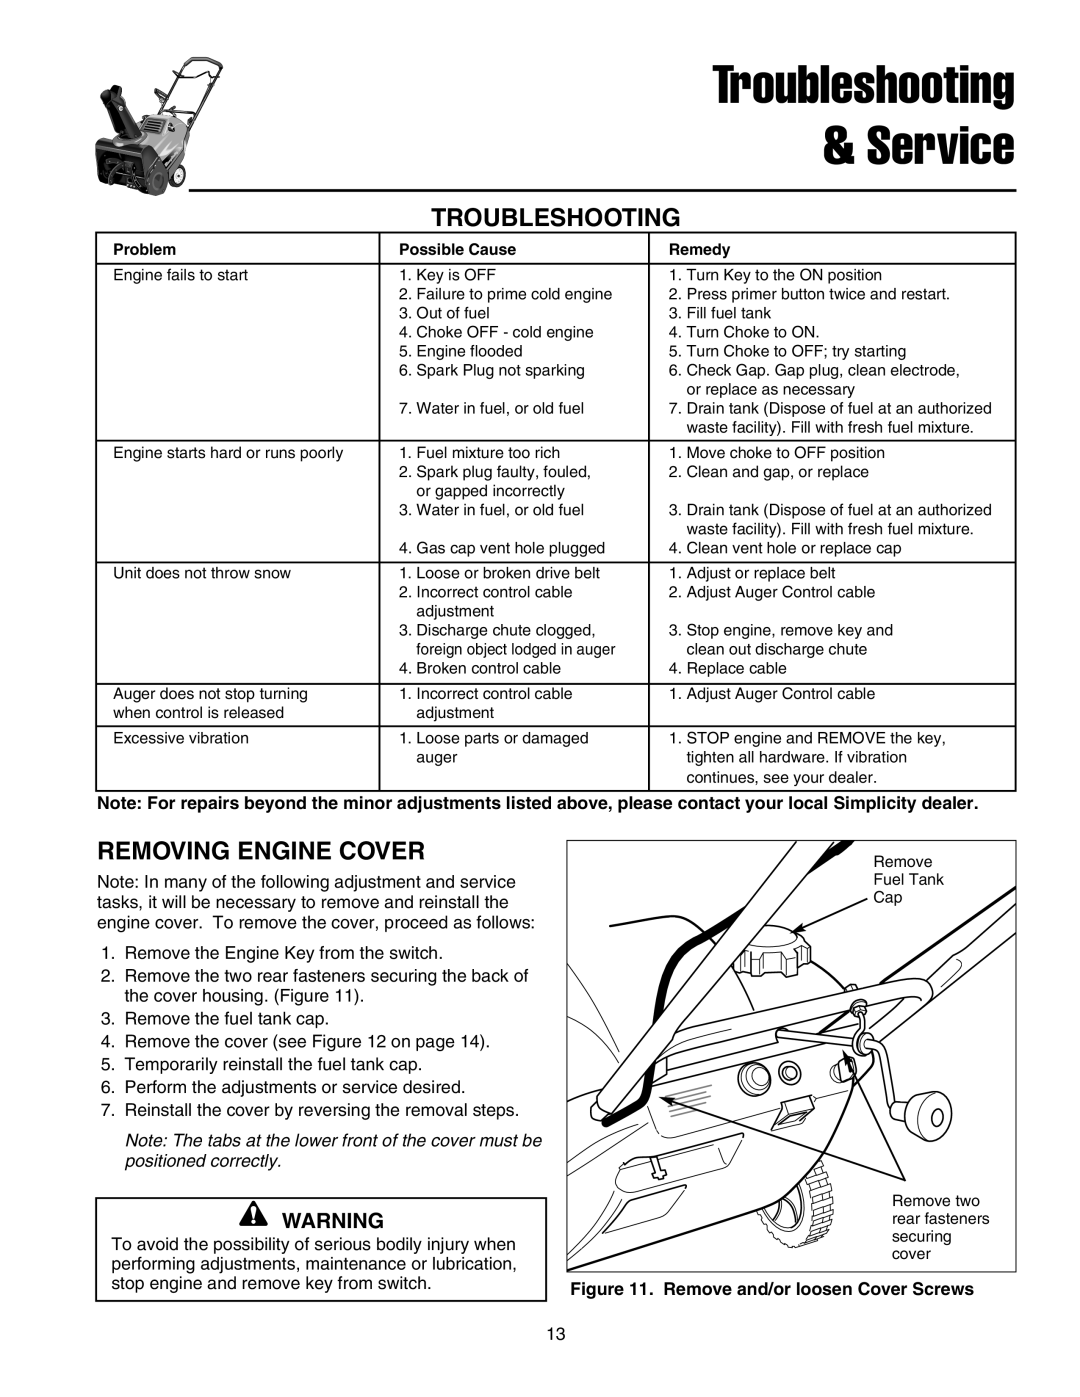 Simplicity 1692981, 1693166, 1692984 Service, Troubleshooting, Removing Engine Cover, Remove and/or loosen Cover Screws 